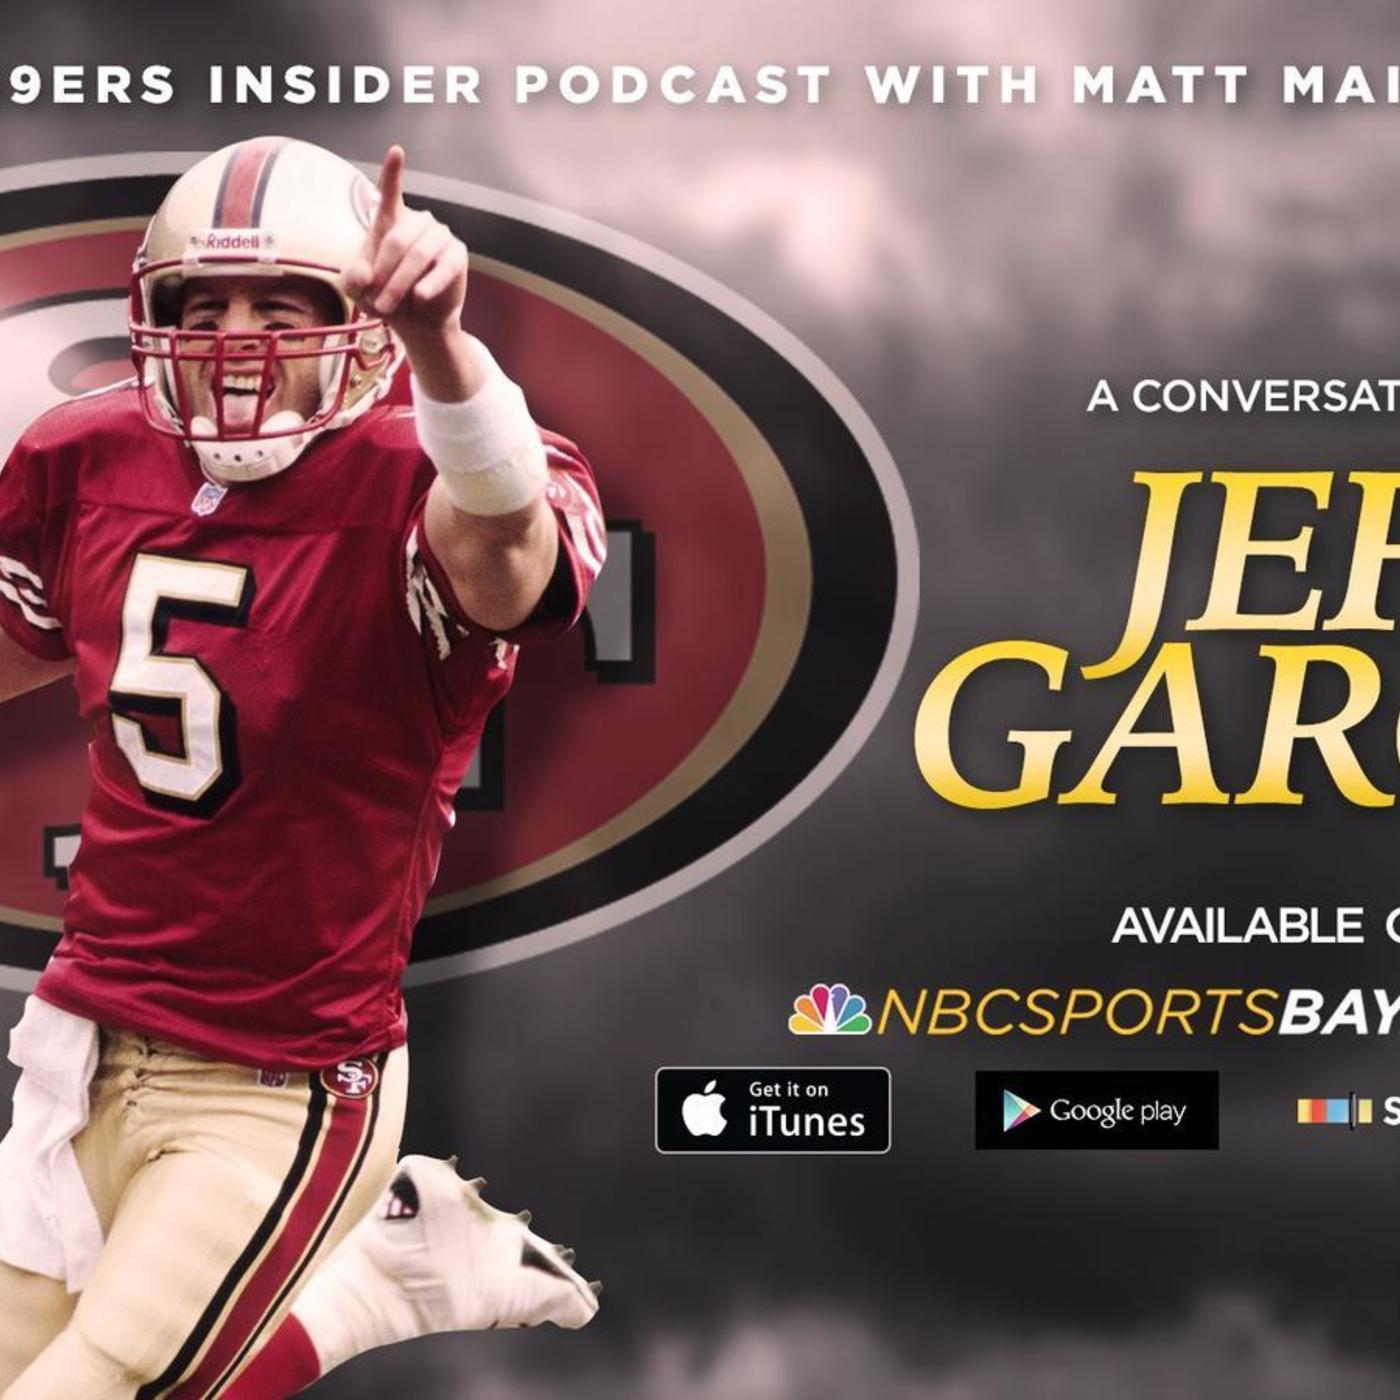 48: 49ers: Jeff Garcia says trade for ex-Patriots backup QB Jimmy Garoppolo allows team to 'focus elsewhere'